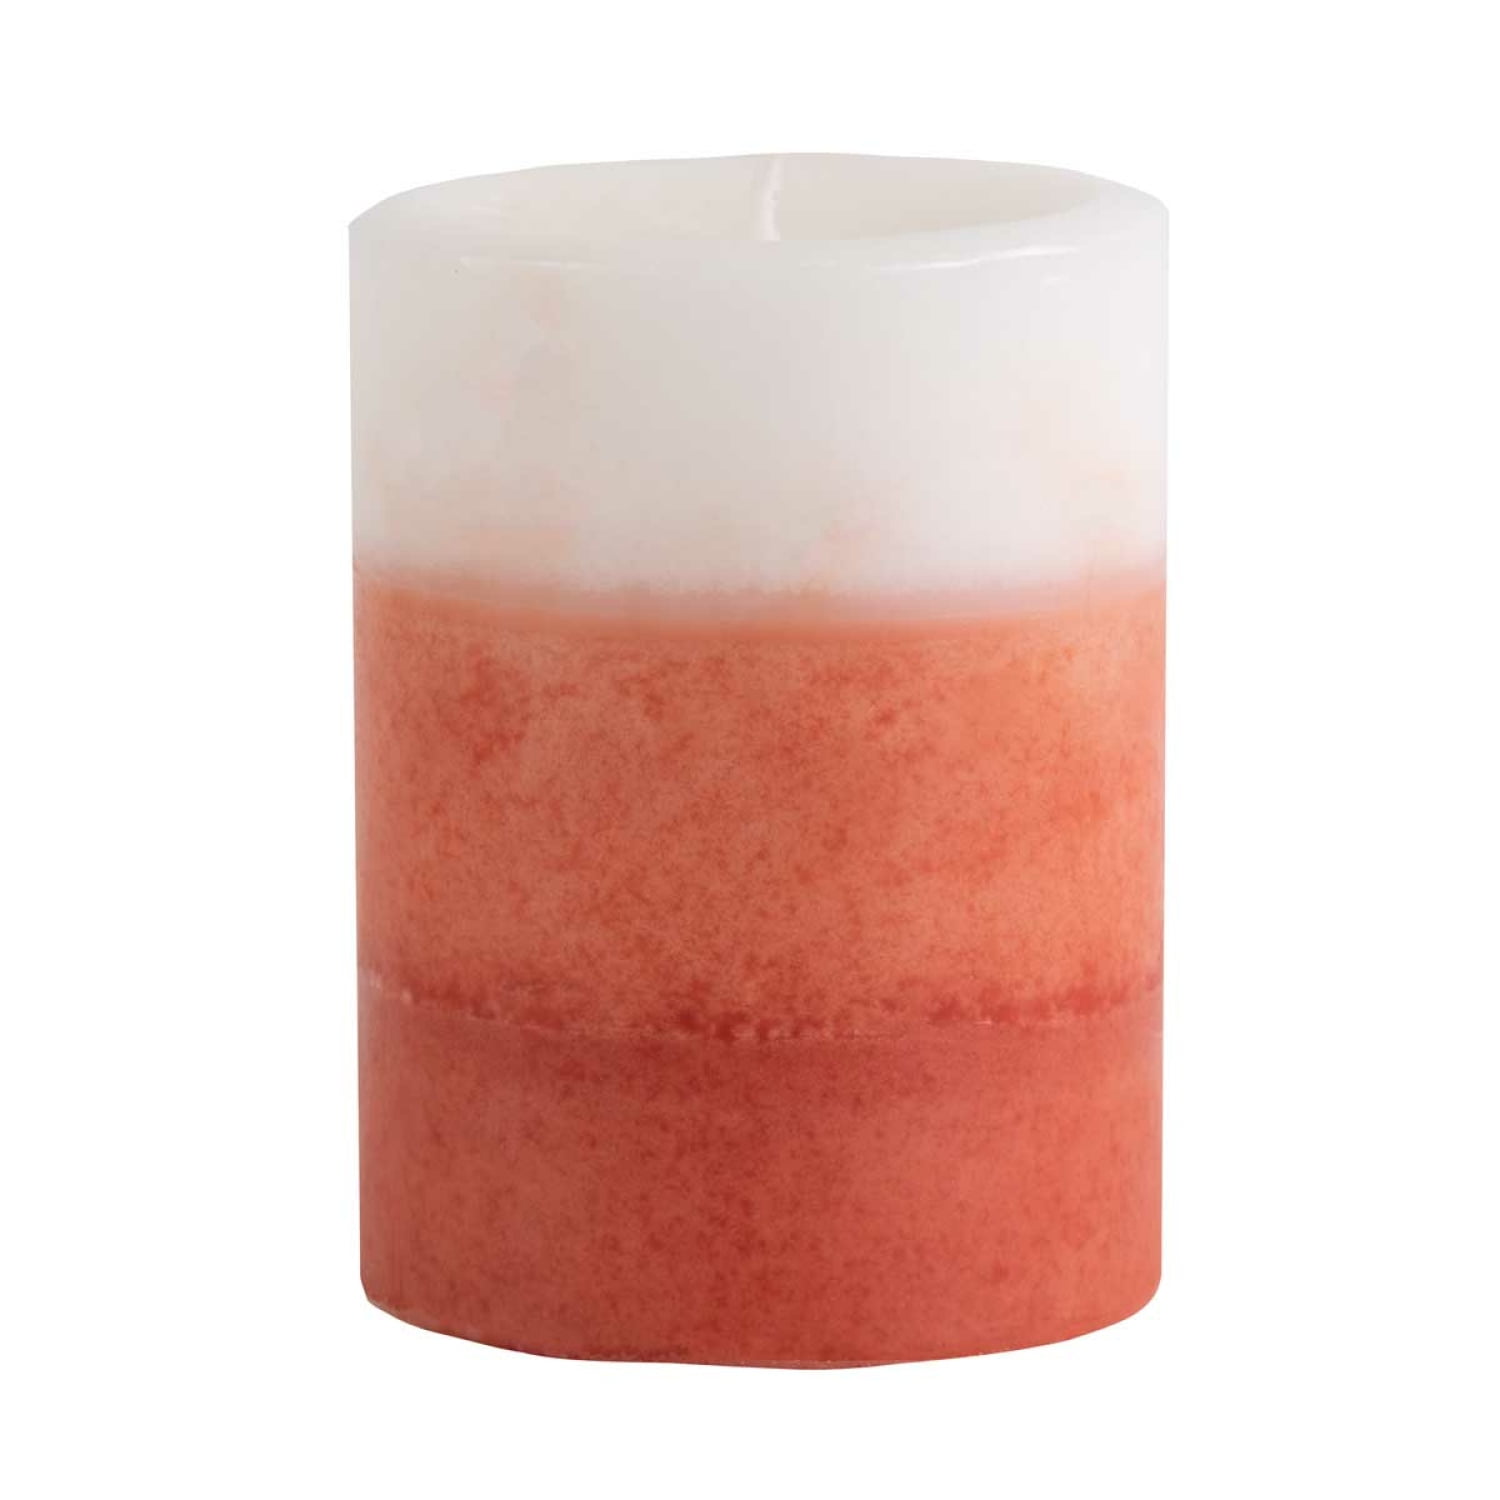 ONE PAIR 3 LAYER 4"x9"  PILLAR CANDLES-HIGHLY SCENTED-U PICK COLORS & FRAGRANCE